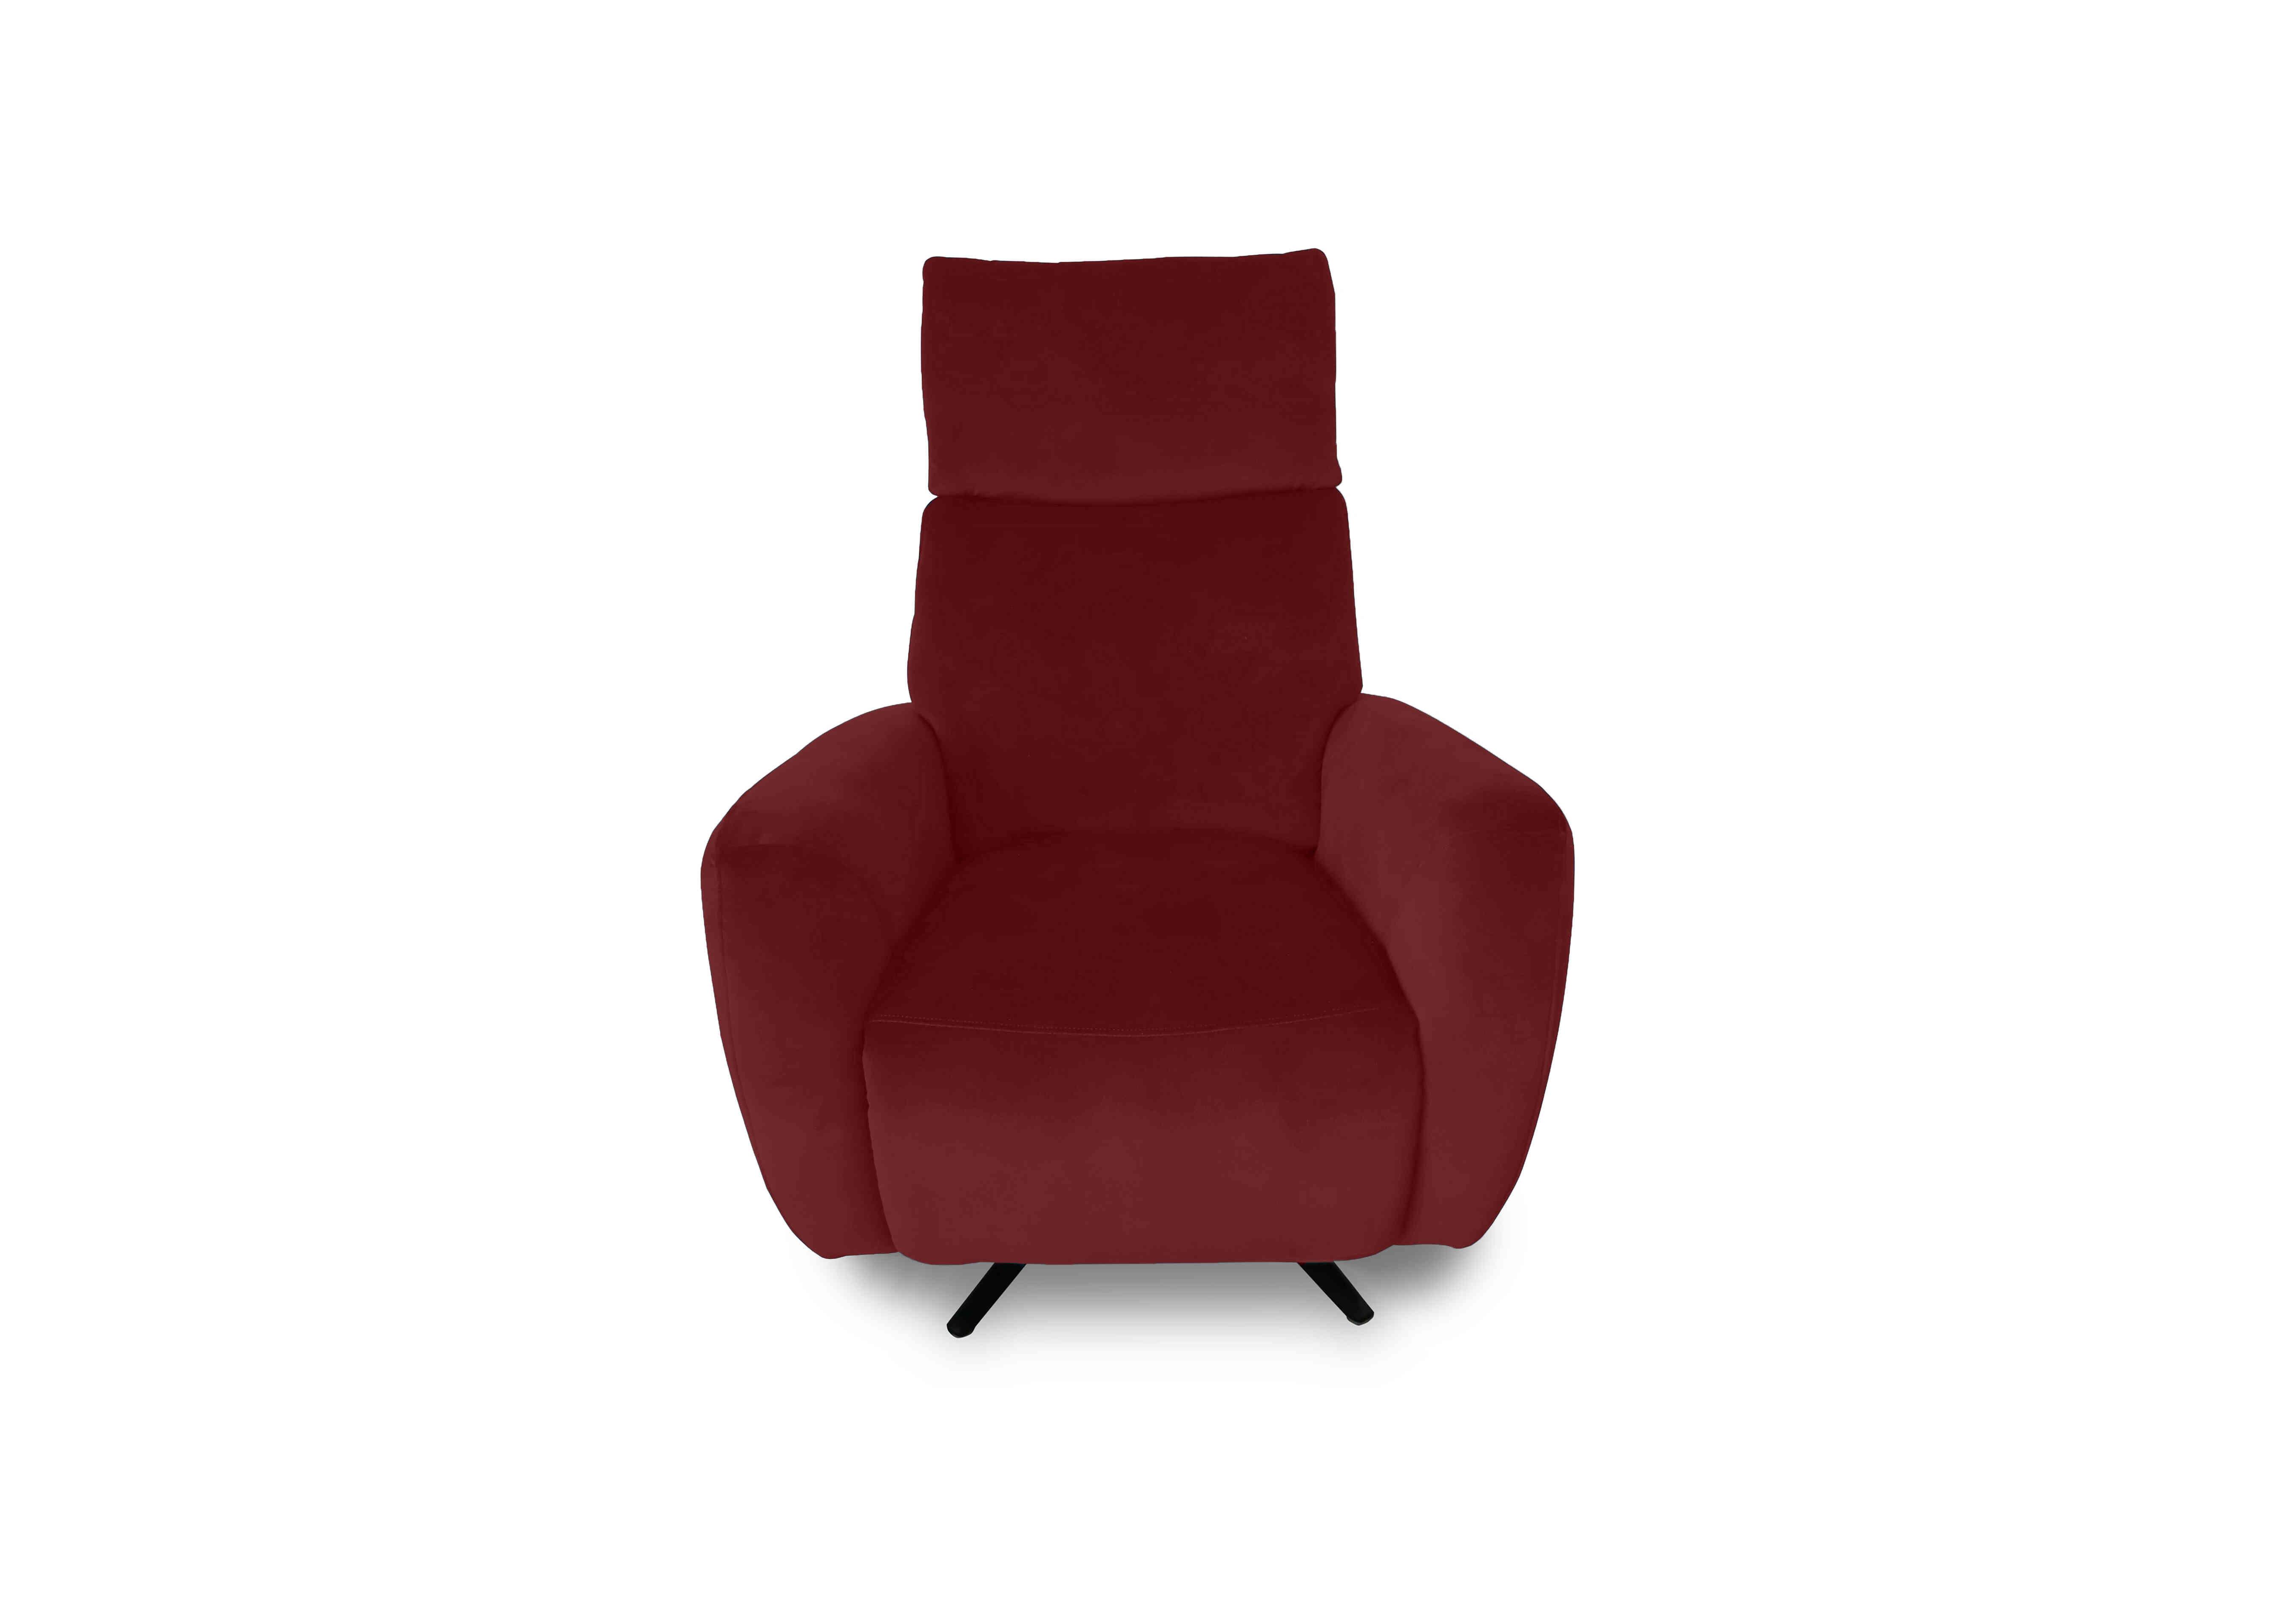 Designer Chair Collection Granada Fabric Power Recliner Swivel Chair with Massage Feature in Fab-Meg-R65 Burgundy on Furniture Village